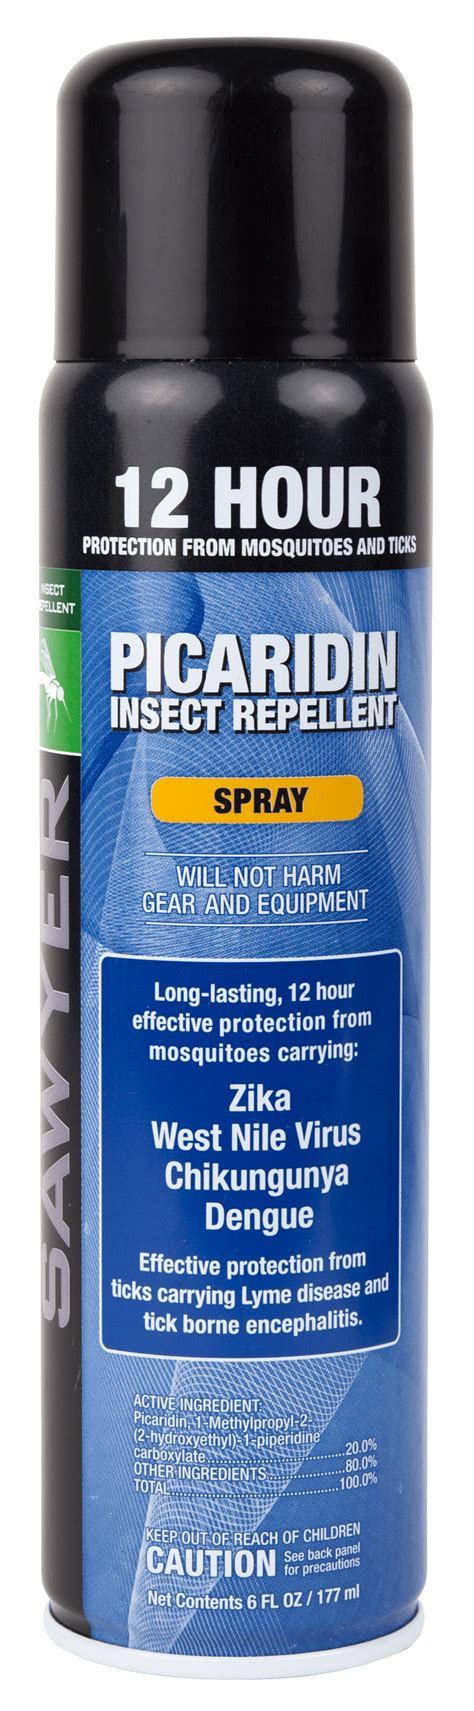 Sawyer Picaridin Insect Repellent | Insect repellent ...